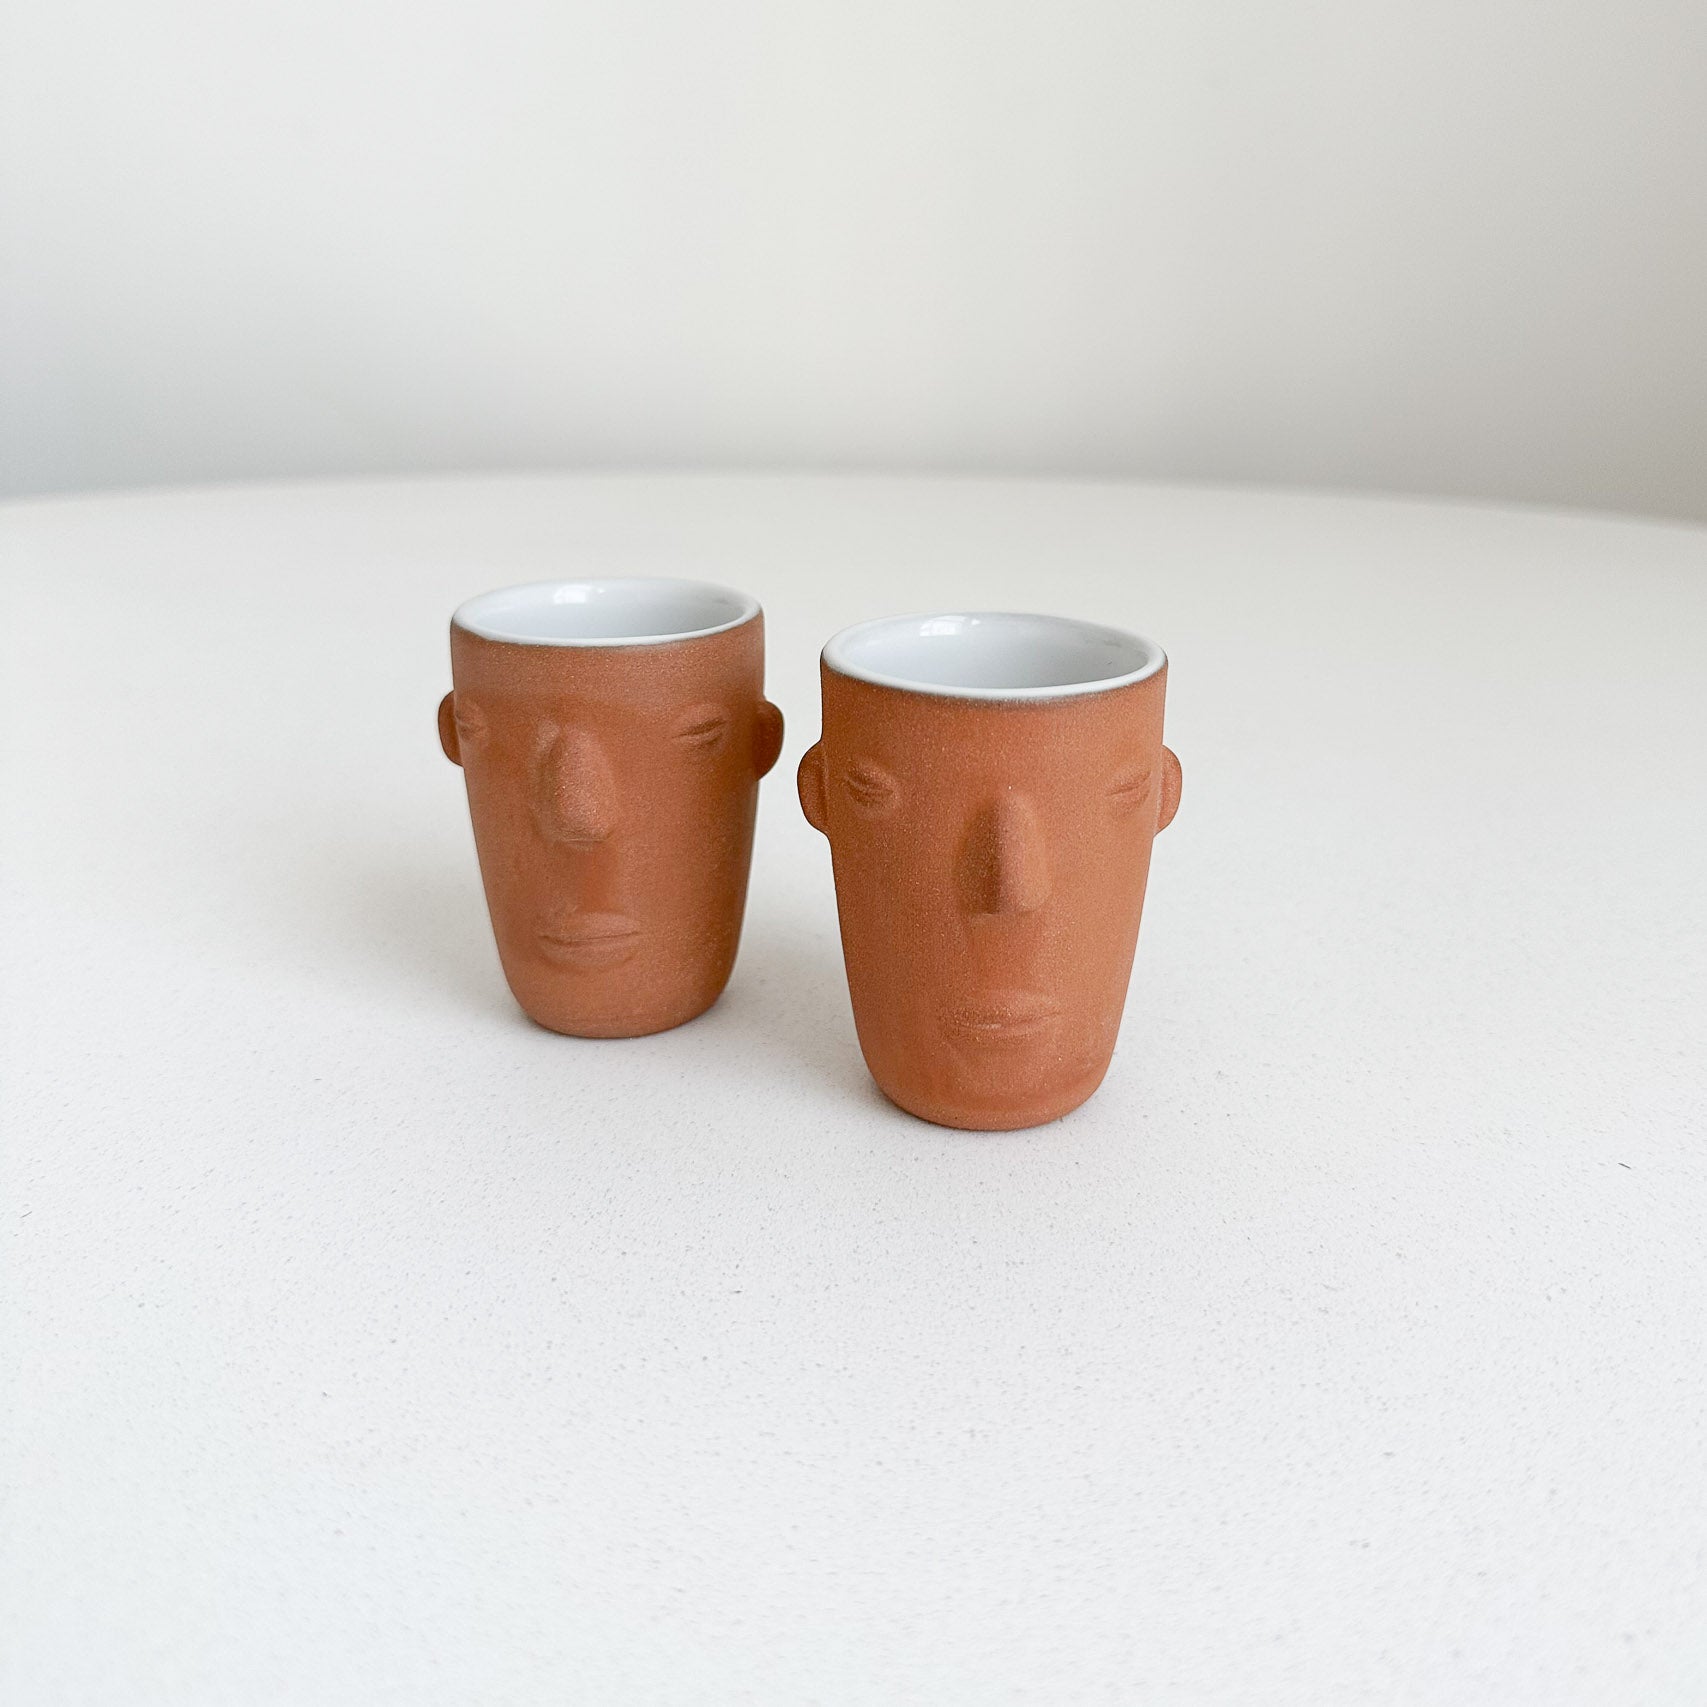 A set of two terracotta copitas with faces on a white table.